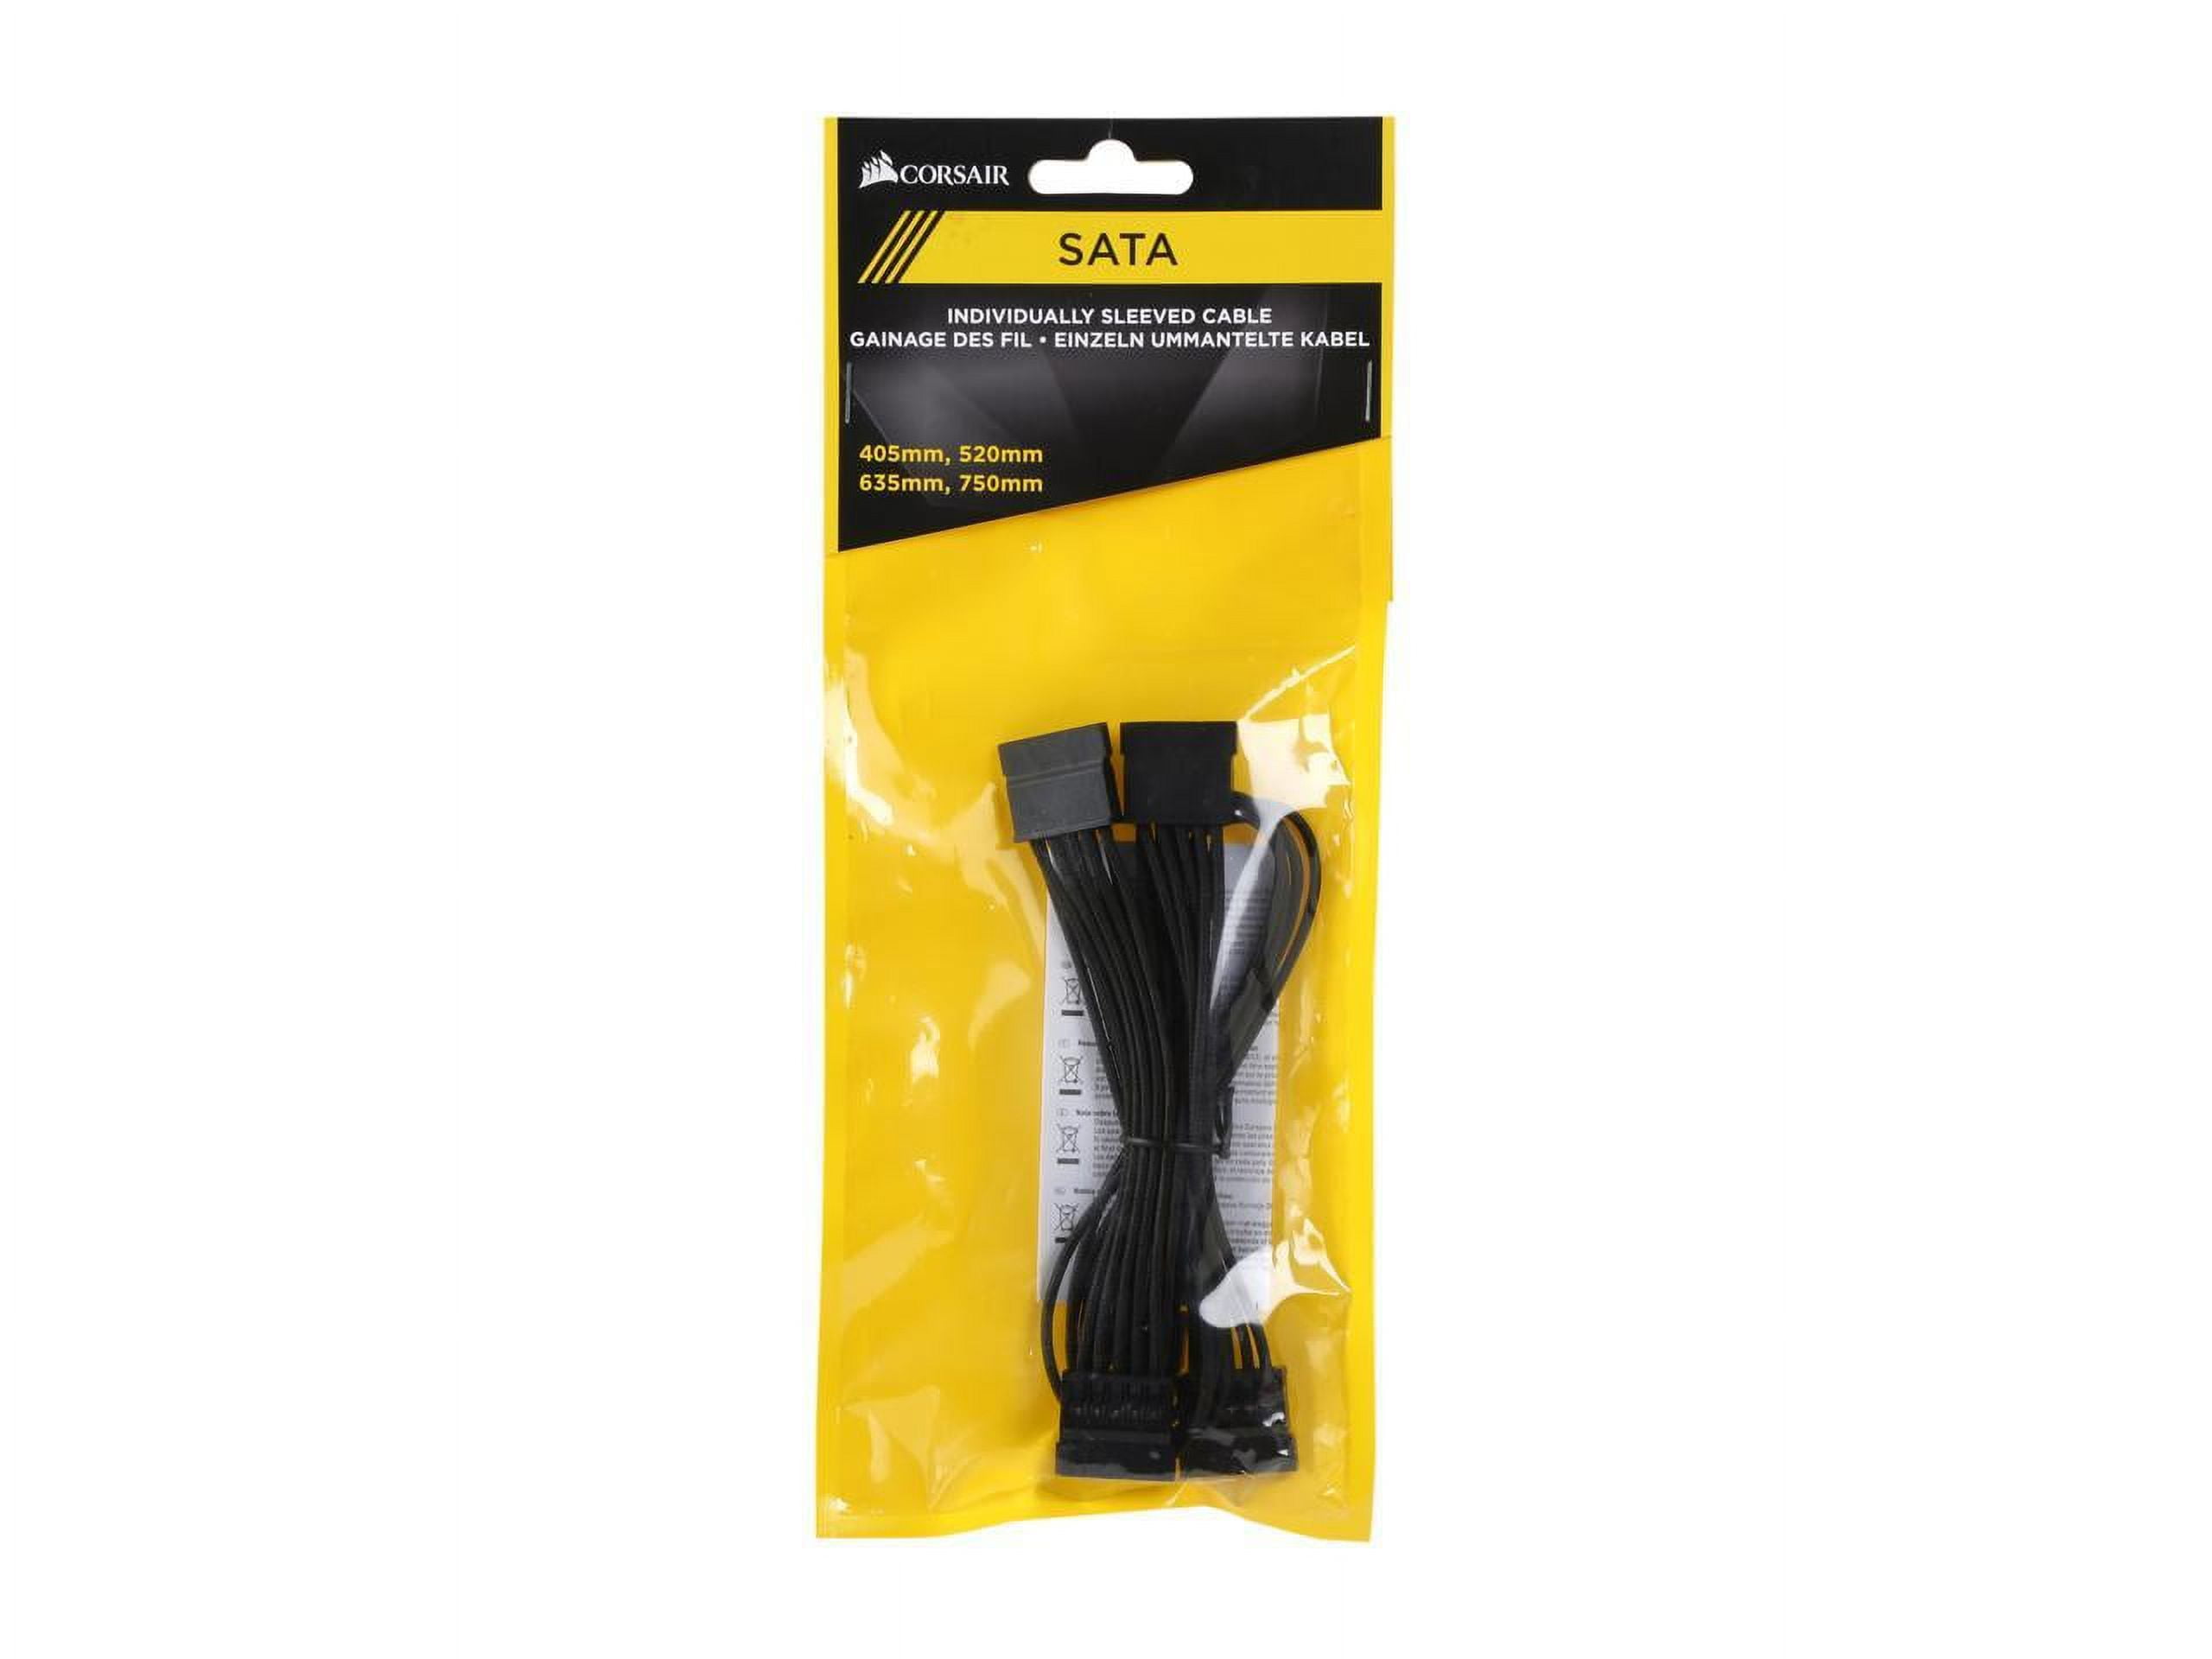 Type (Generation Cable, 2.46 3) SATA Sleeved (0.75m) 4 Corsair CP-8920186 Individually Premium ft.